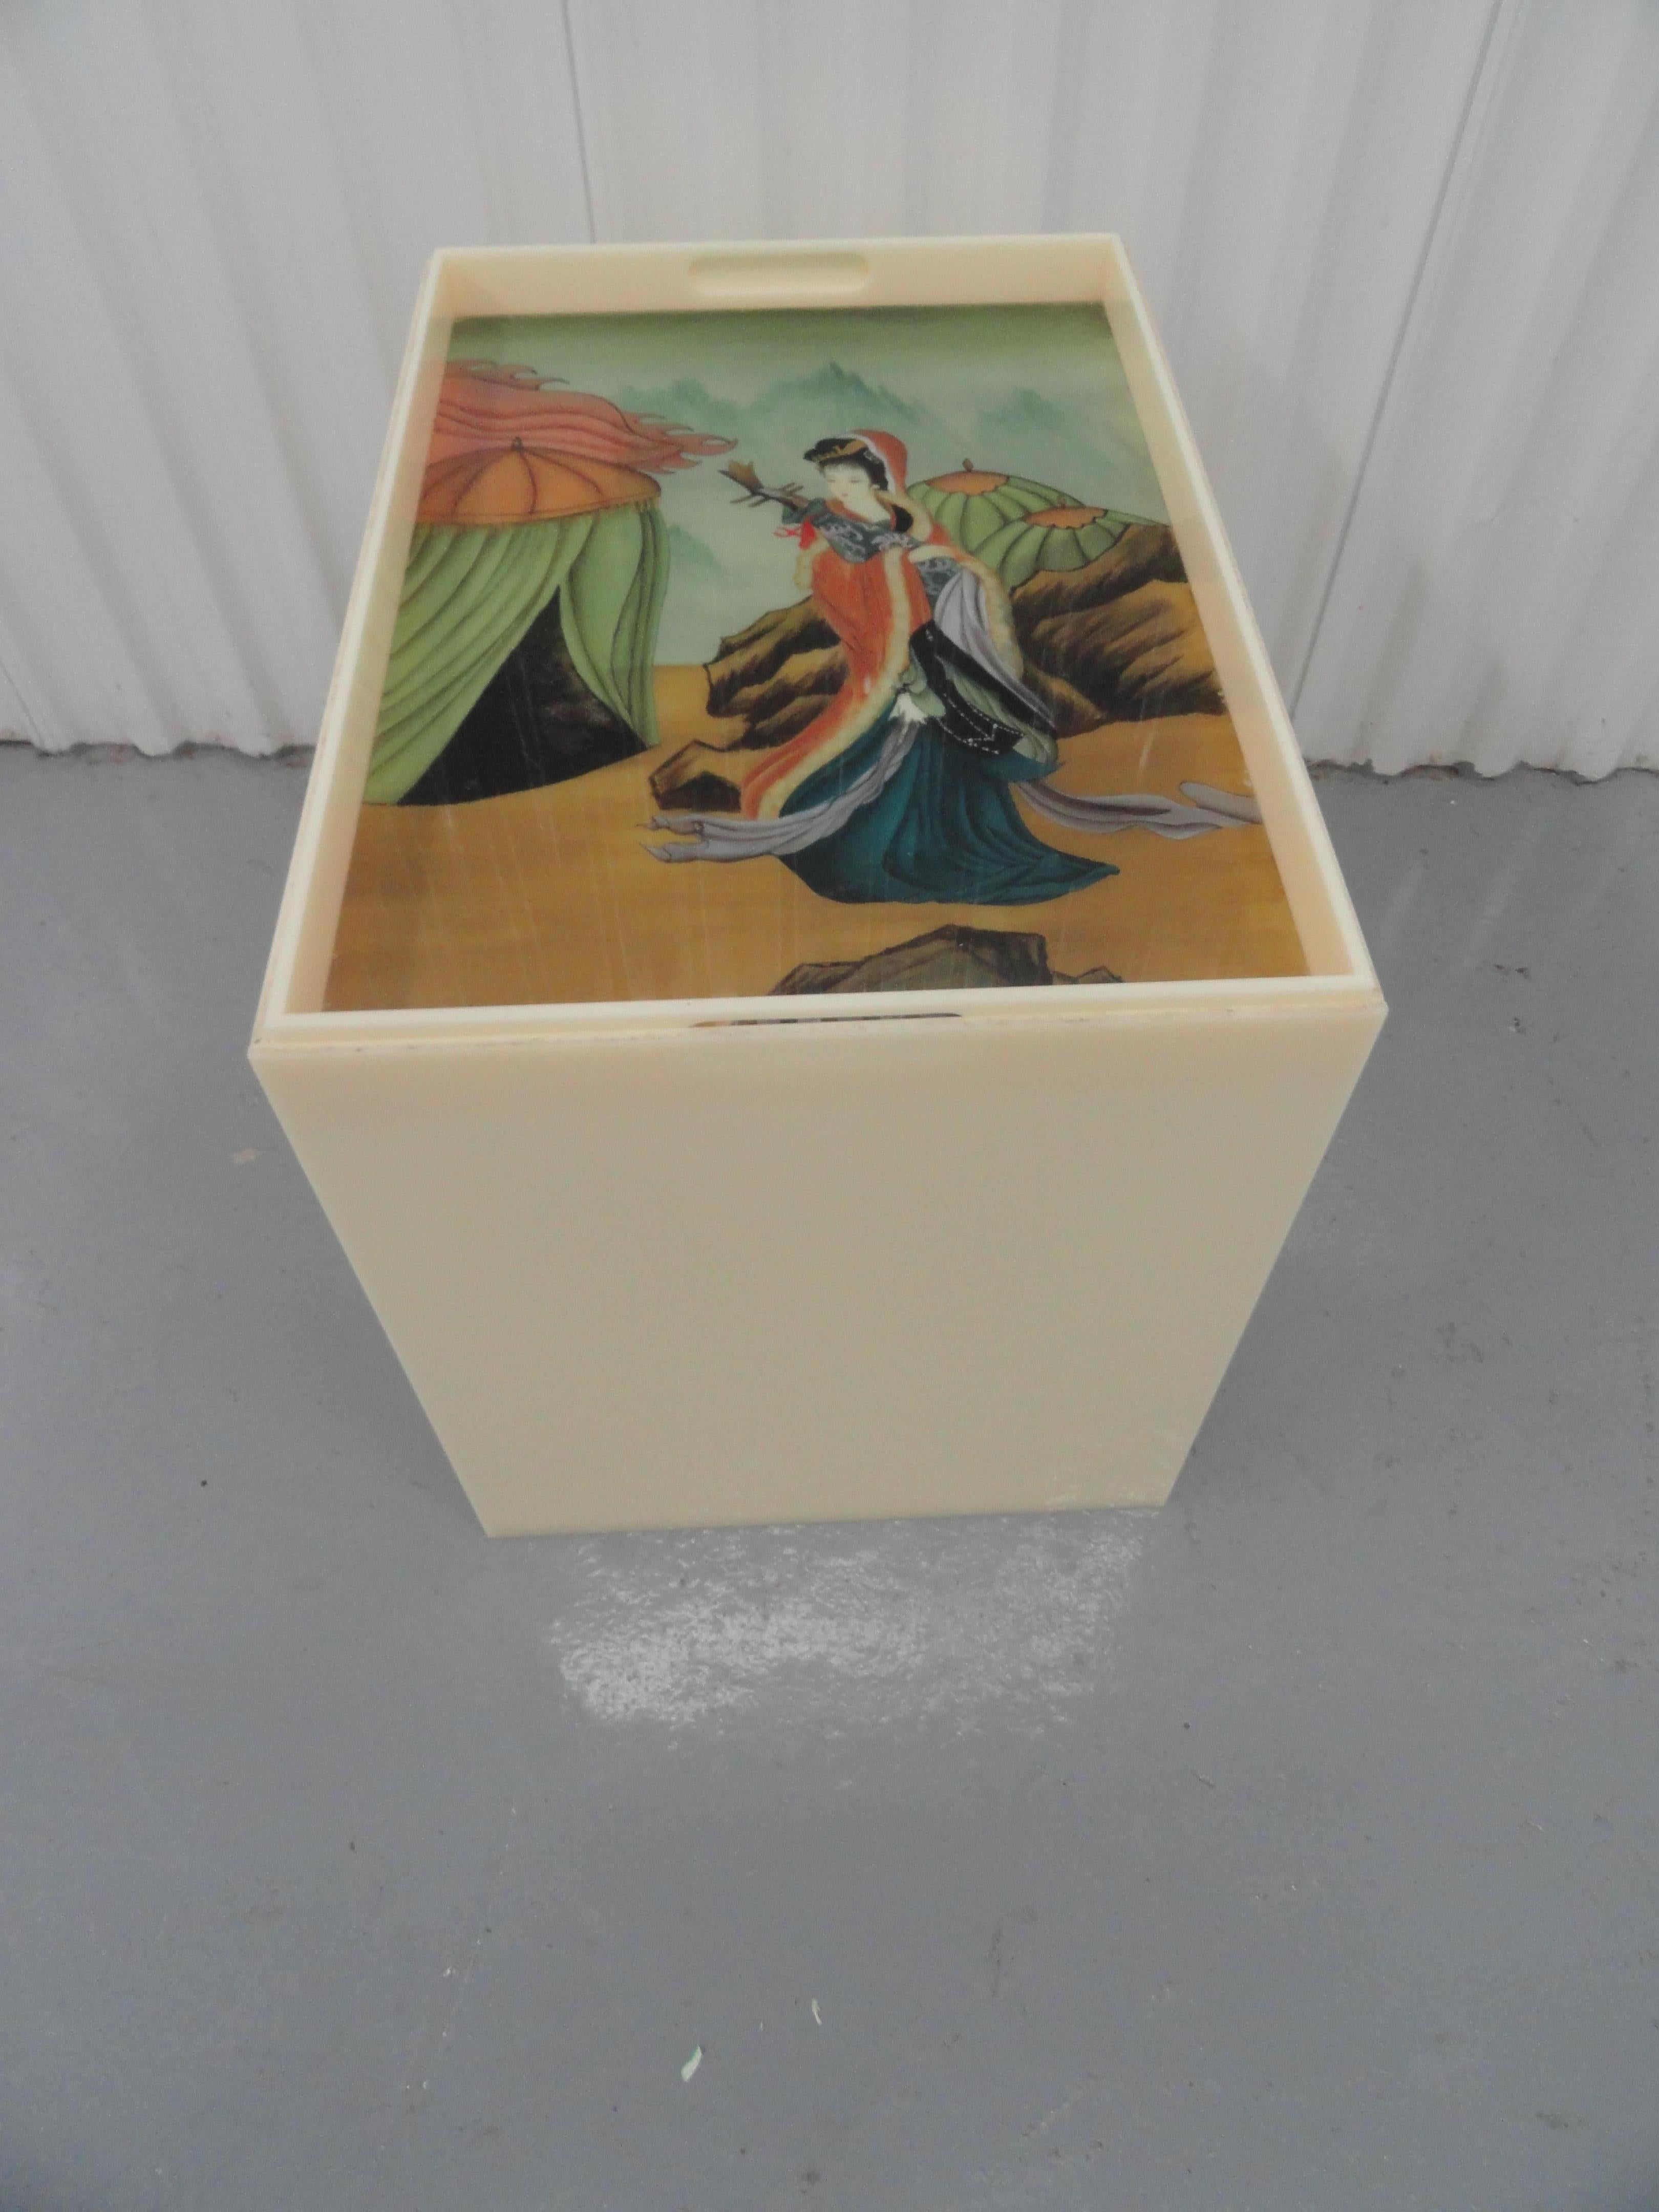 Custom acrylic table with removable top. The top contains an inserted piece of reverse glass painted art of an Asian female figure.